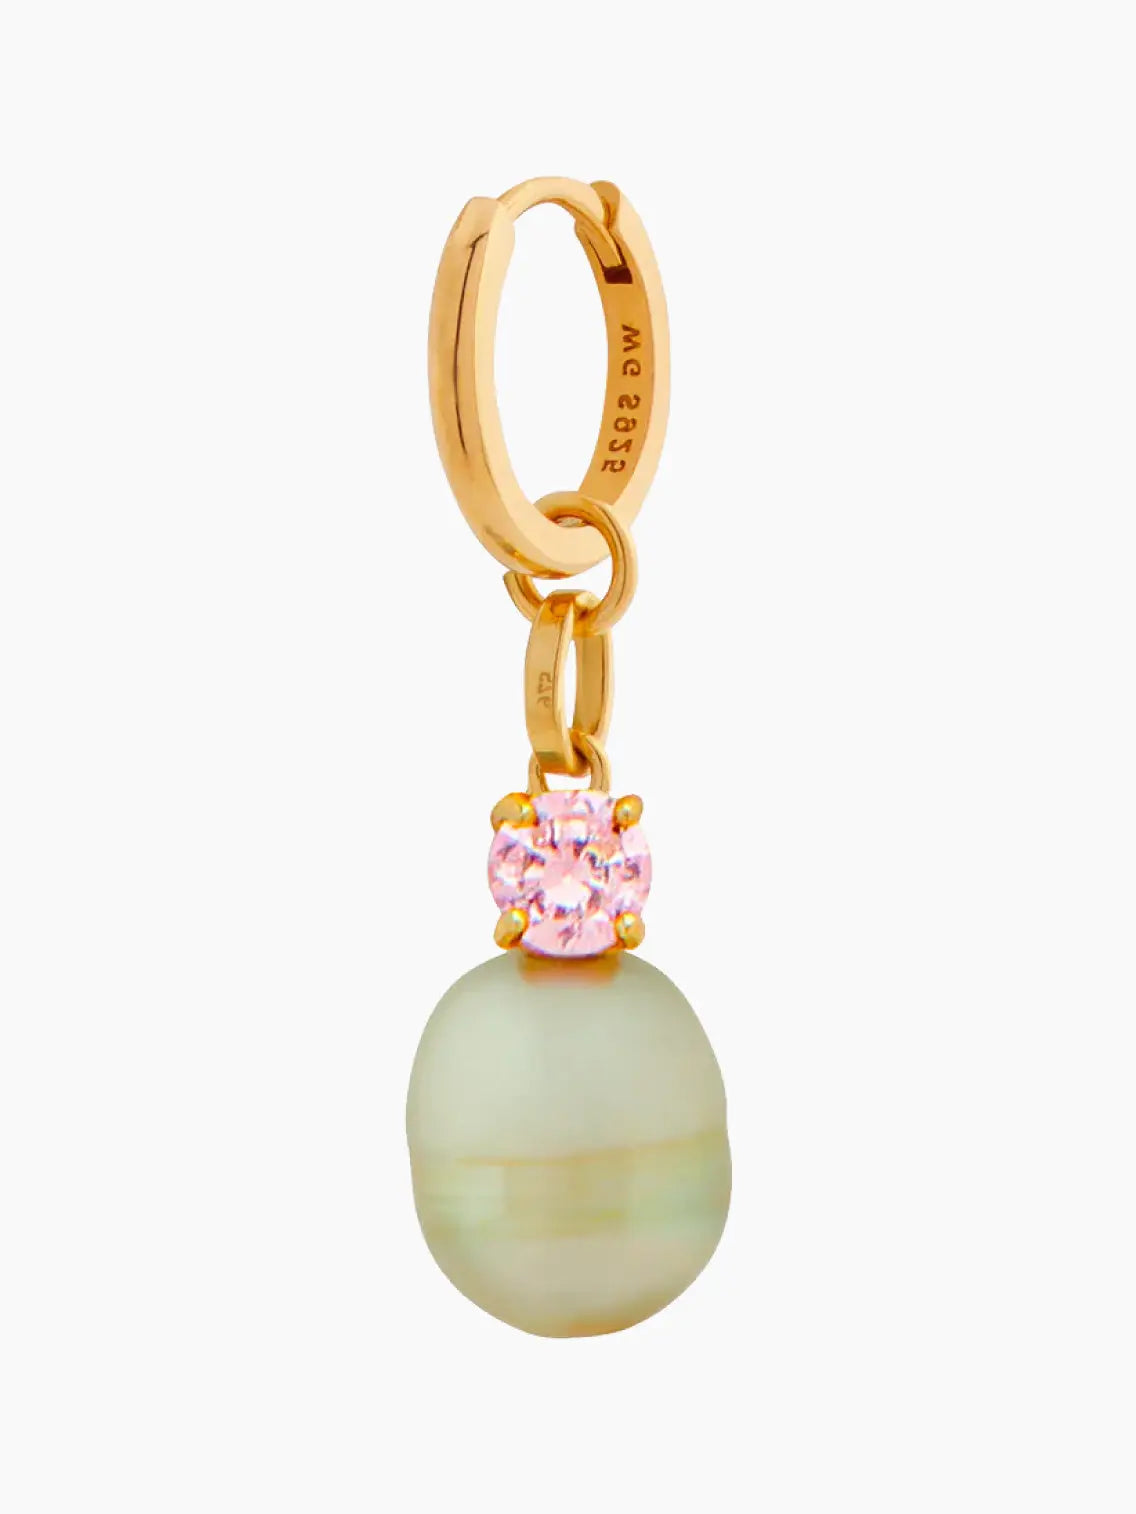 A gold hoop earring from Wilhelmina Garcia, called the Bailarina Hoop Earring, features a hanging light green pearl and a small pink gemstone above it. The earring has an inscription "925" on the inner side of the hoop. The background is white.